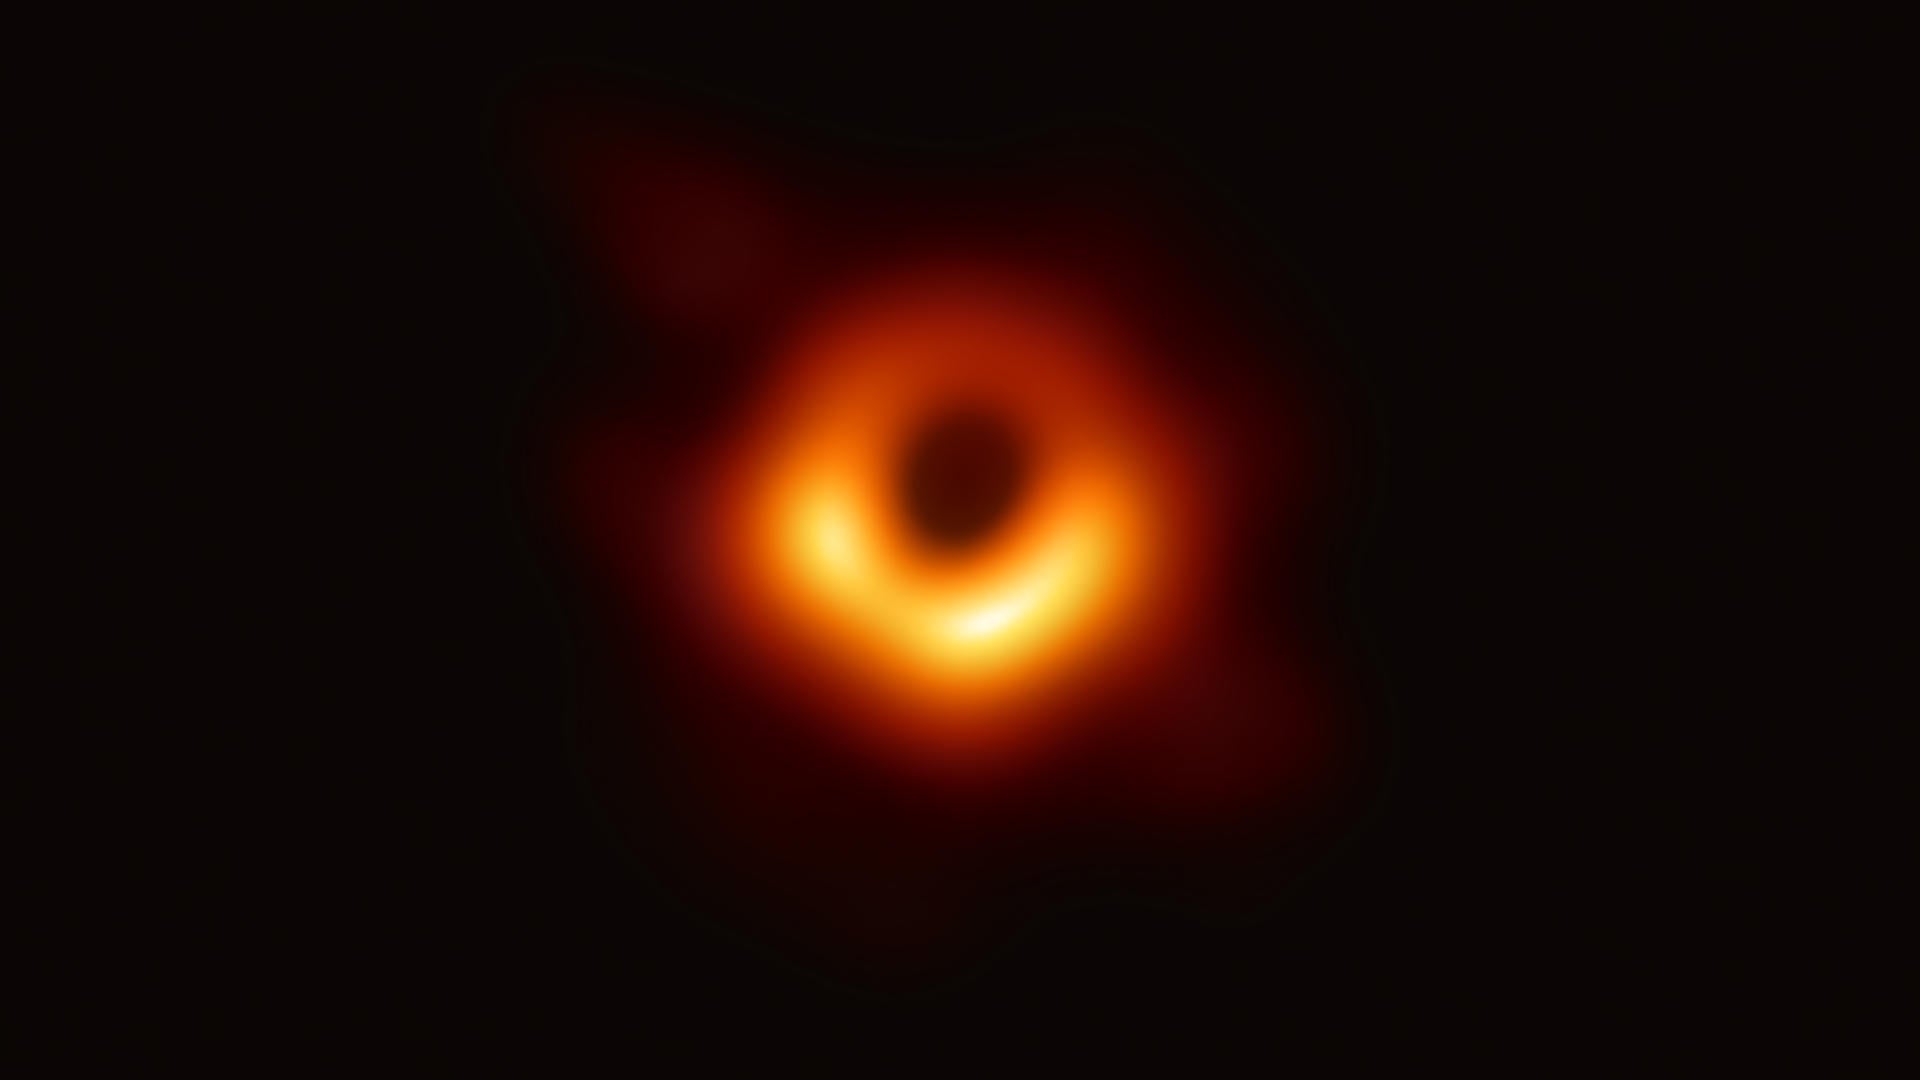 Black hole image, showing a red and orange circle of light before it has crossed the event horizon